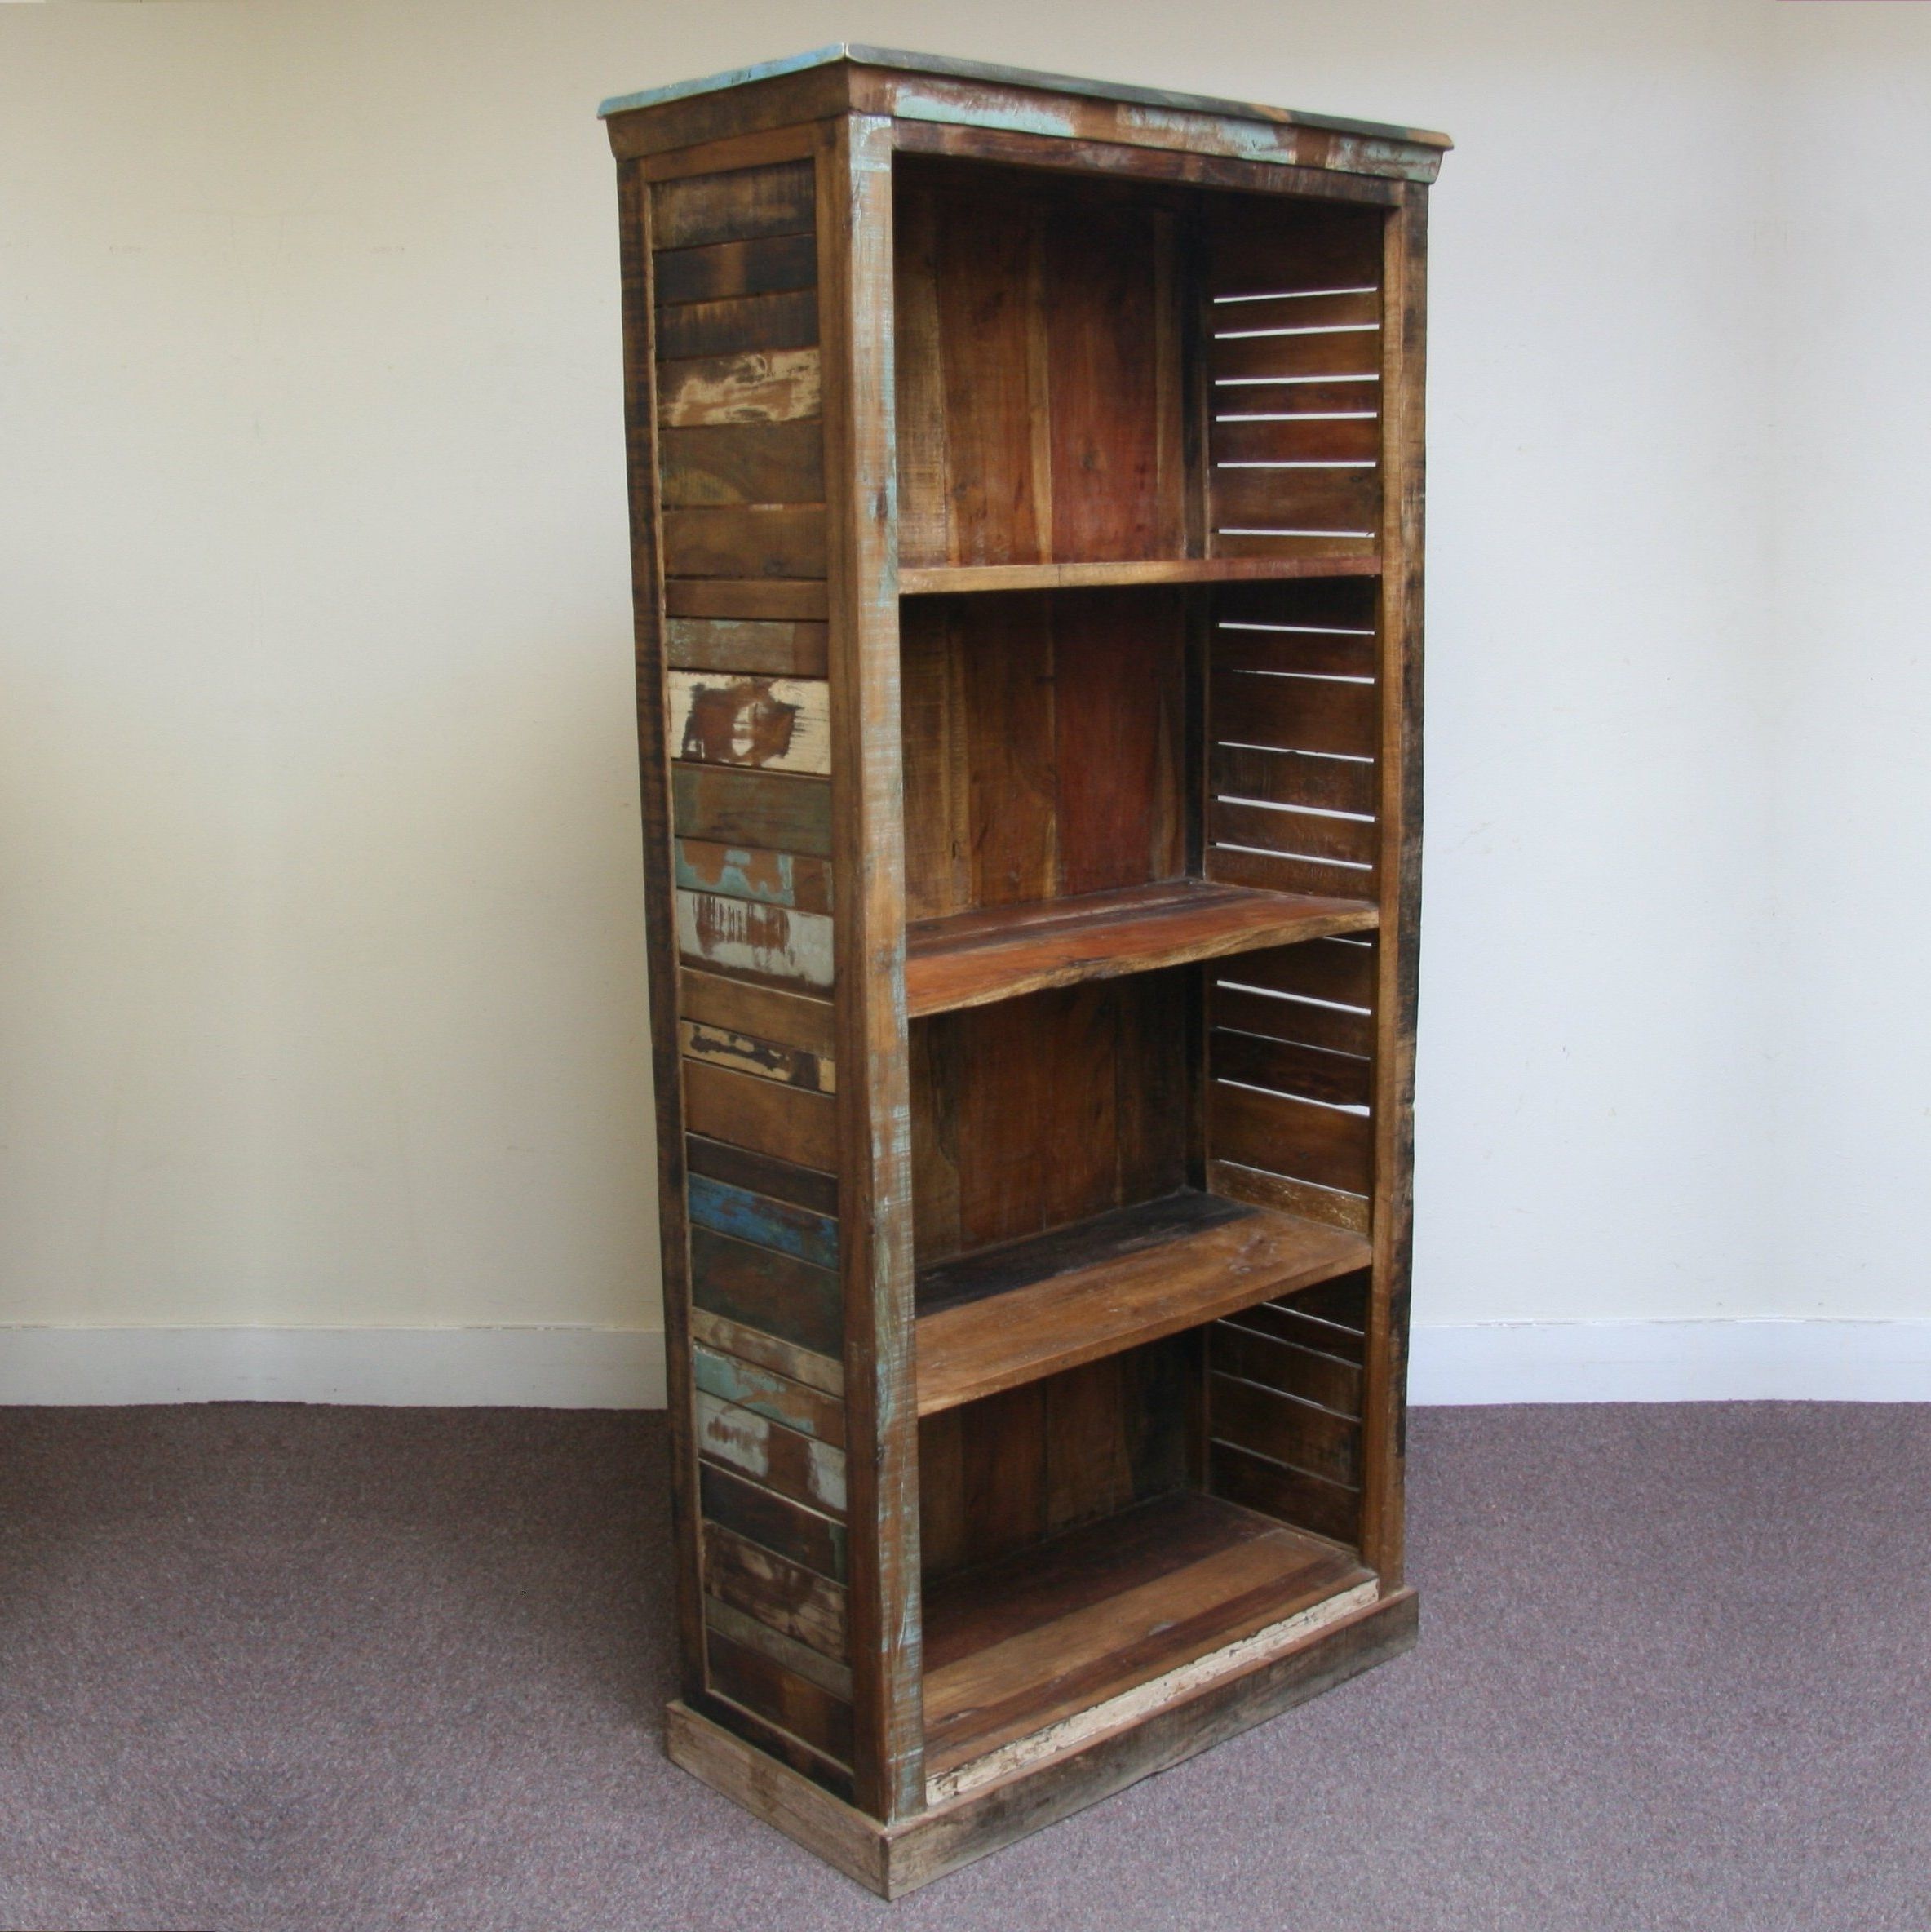 Reclaimed Wood Bookcases Throughout Newest Reclaimed Wood Bookcase – Jugs Indian Furniture & Accessories (View 1 of 15)